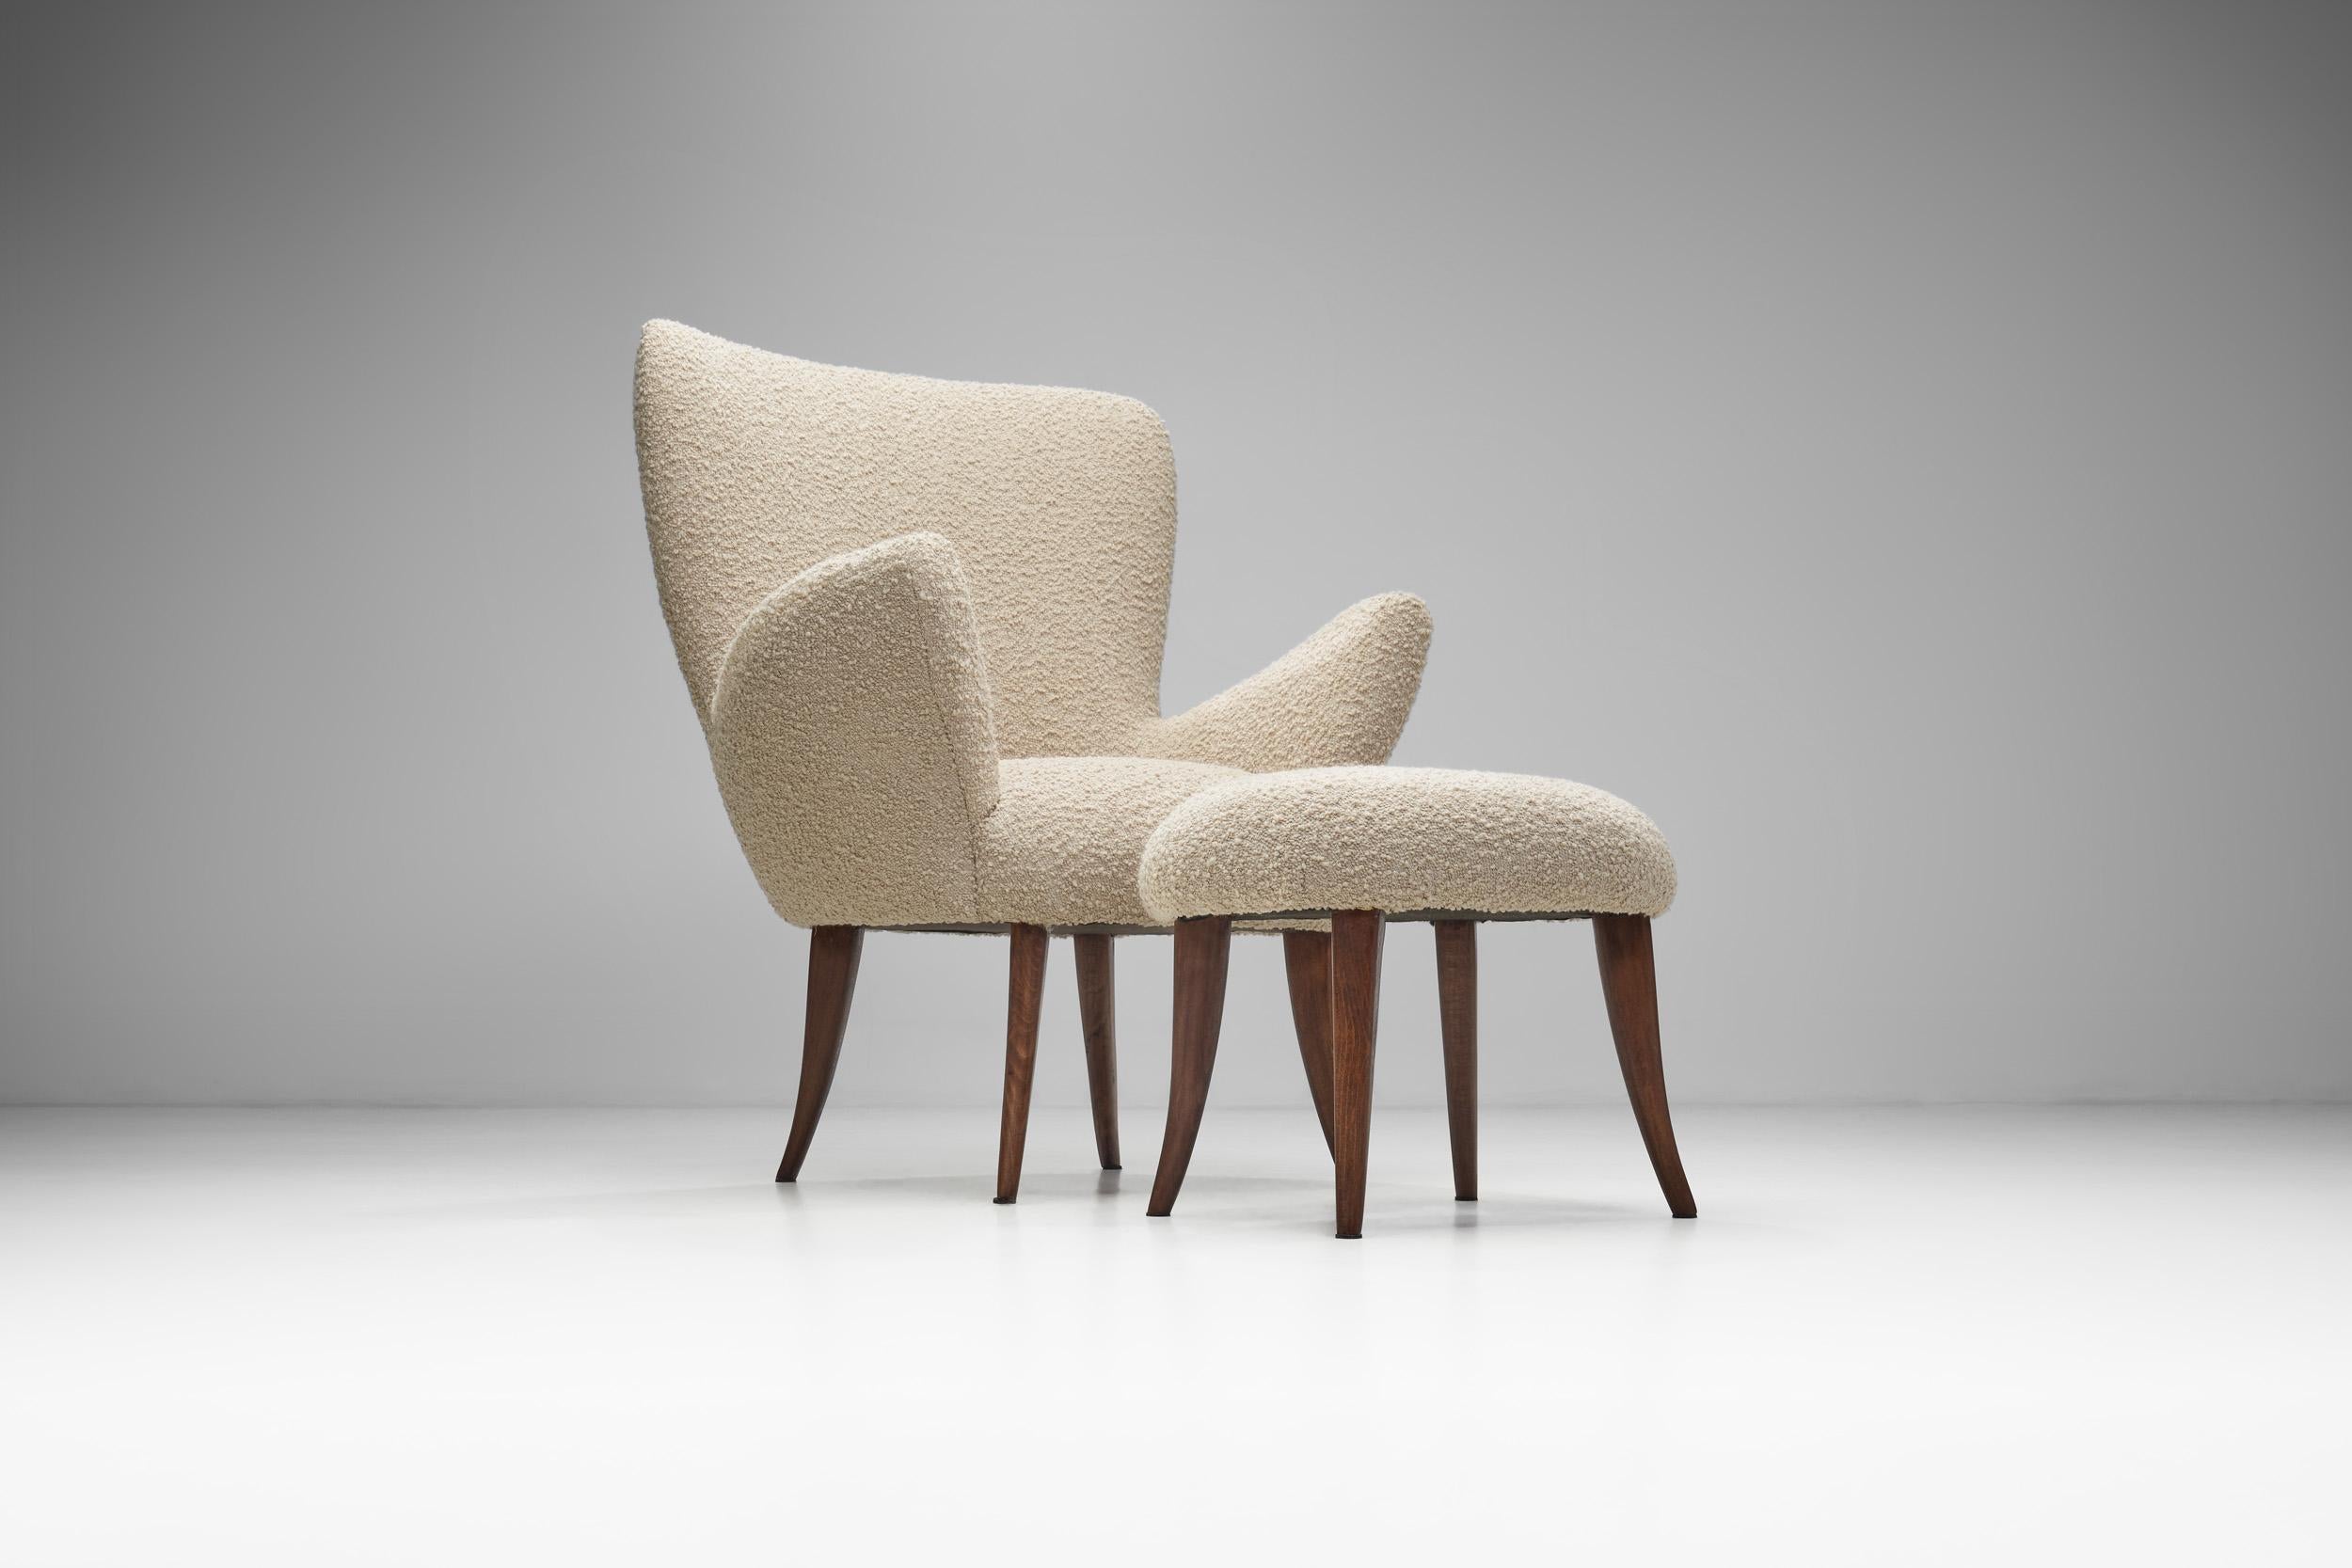 European Cabinetmaker Chairs Upholstered in Bouclé, Europe ca 1950s For Sale 8